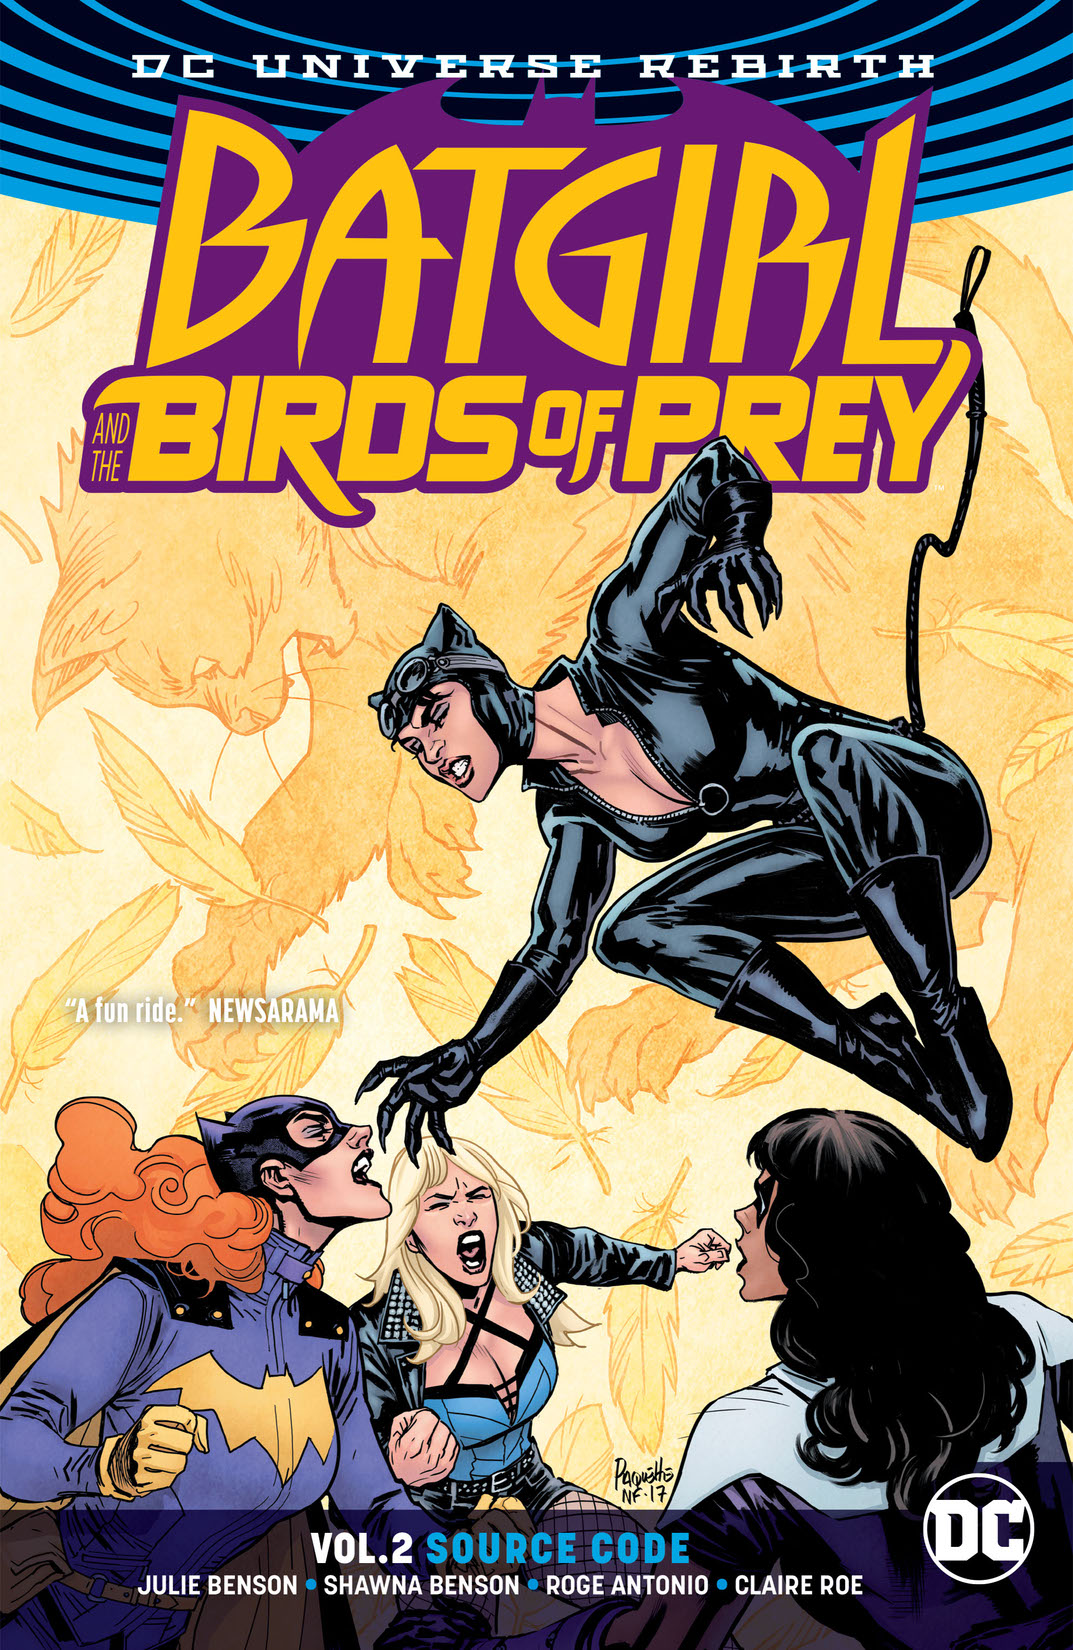 Batgirl and the Birds of Prey Vol. 2: Source Code preview images